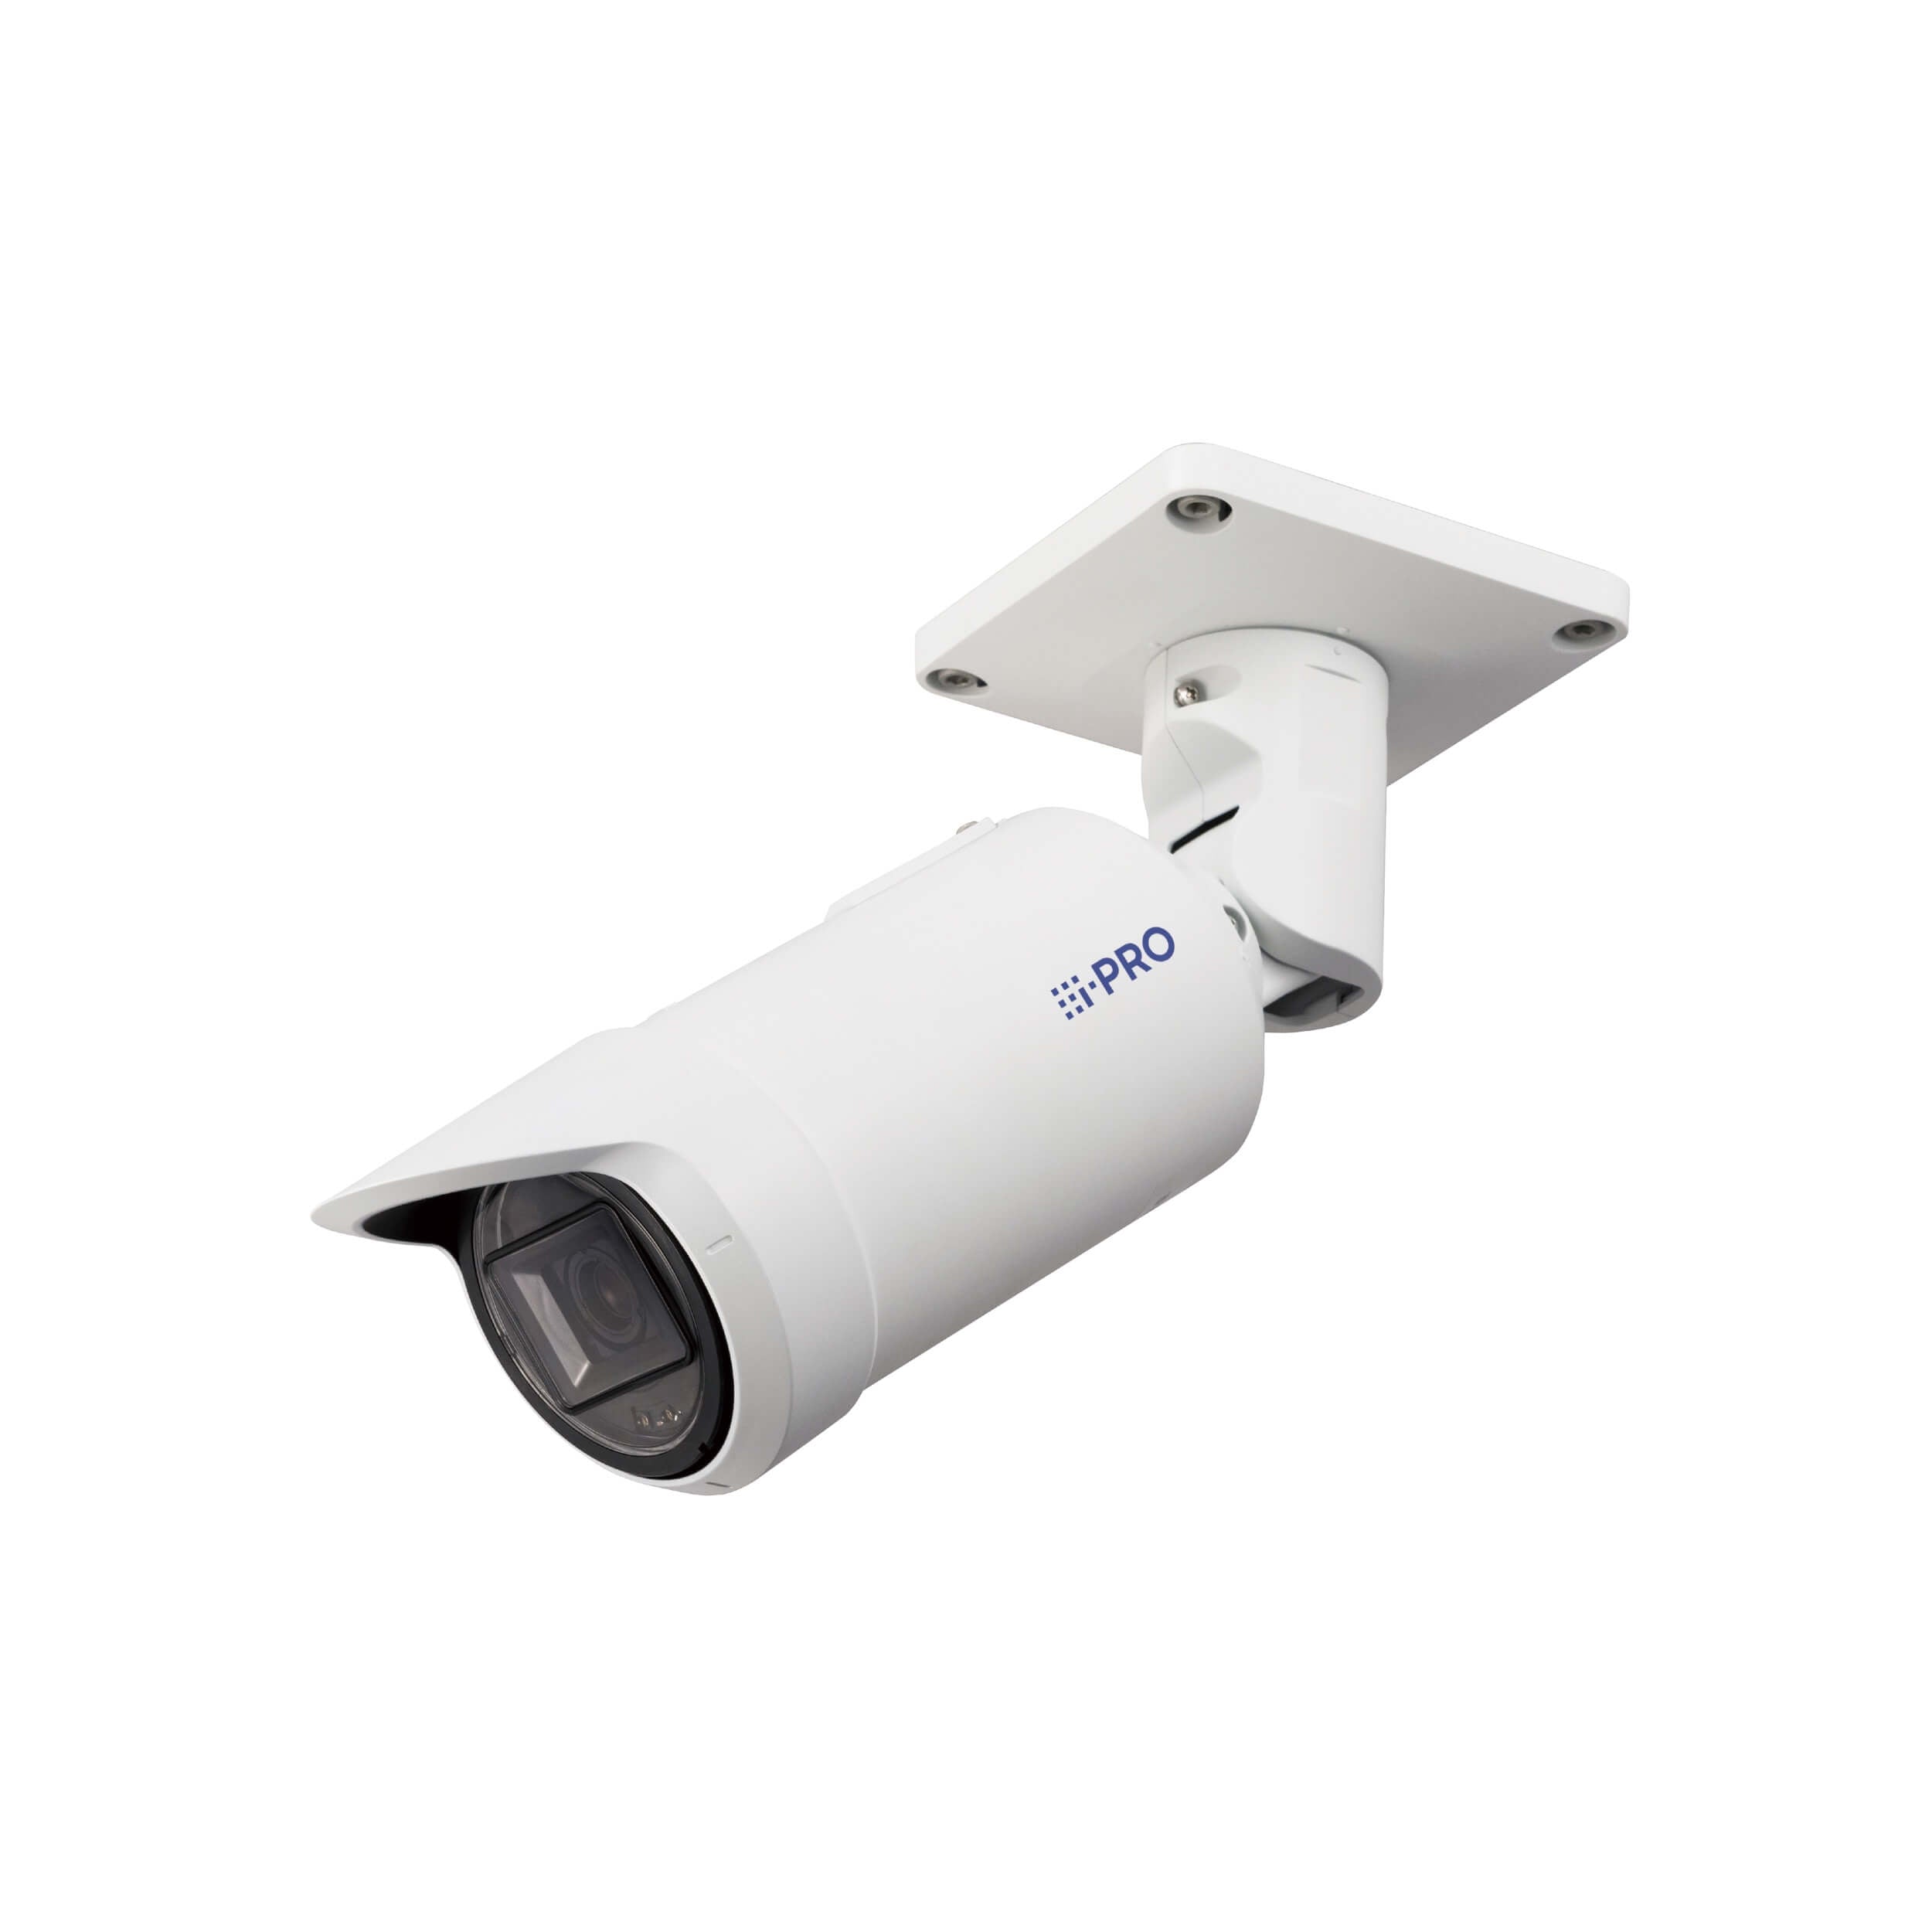 Panasonic WV-S15500-V3LN 5MP Outdoor Bullet Network Camera with AI Engine with 2.9-9mm Lens